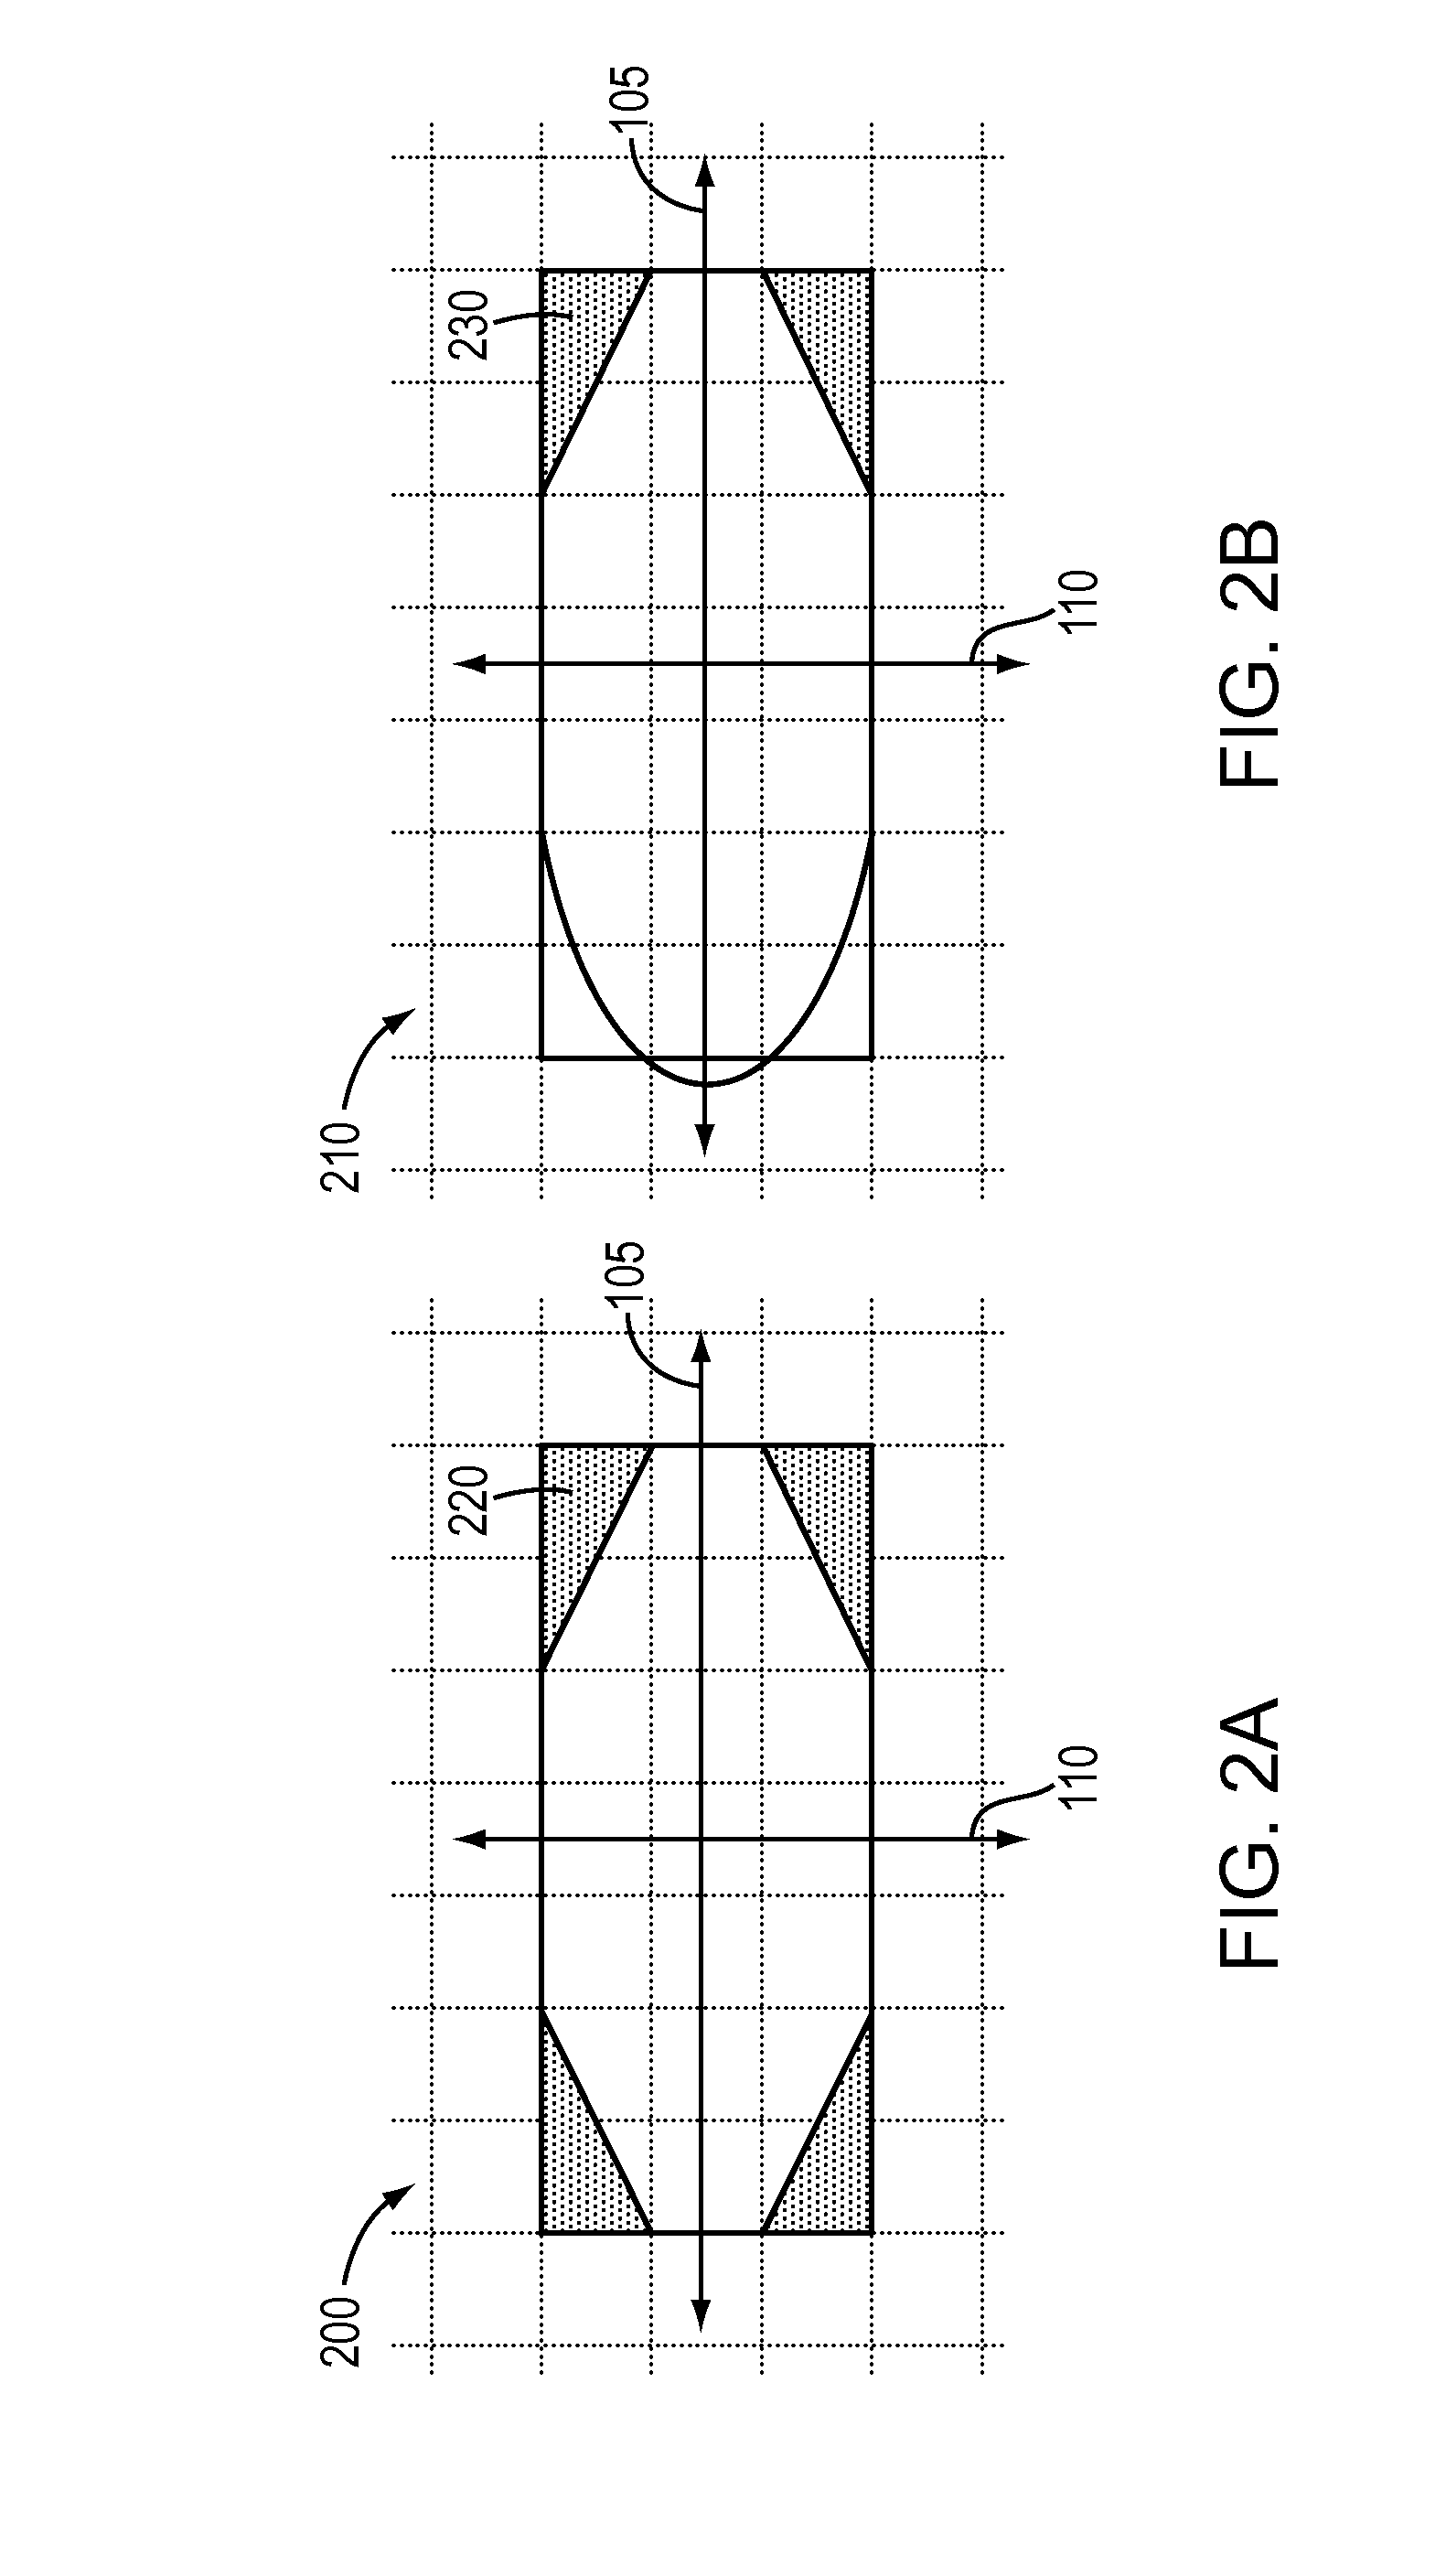 Electric motor having an approximated ellipsoid shaped rotor